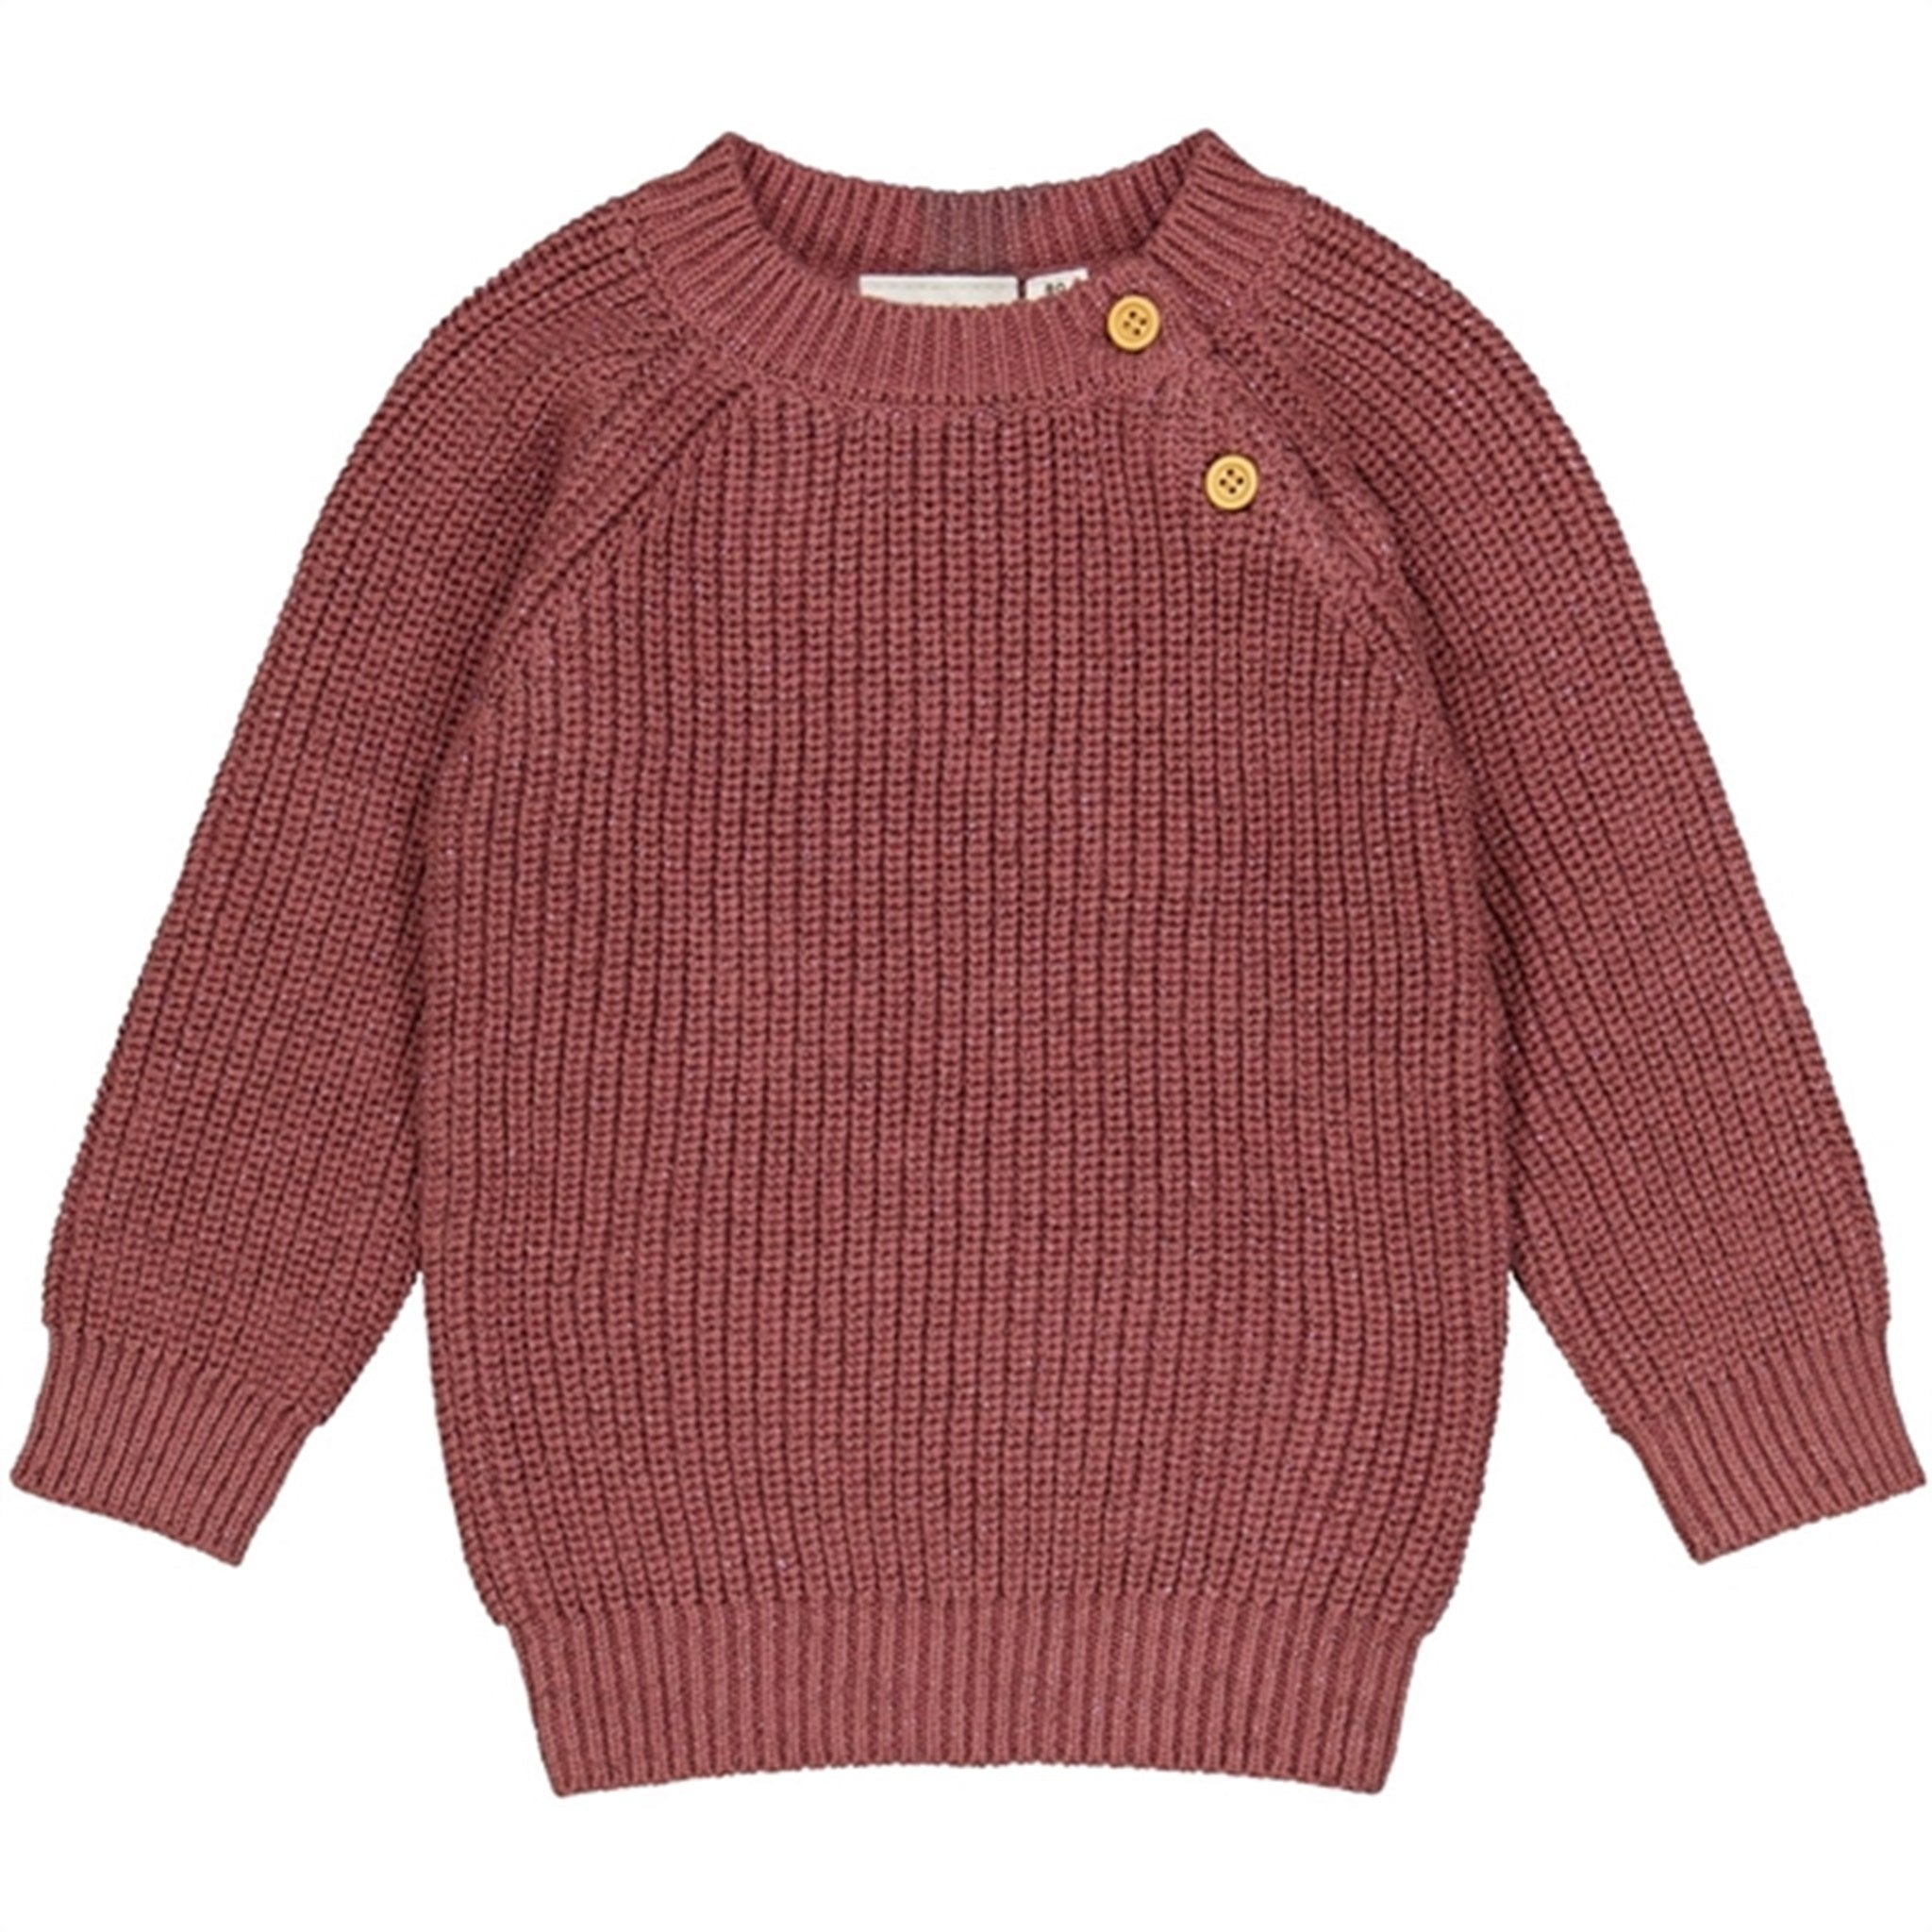 THE NEW Siblings Rose Brown Heather Glitter Pullover